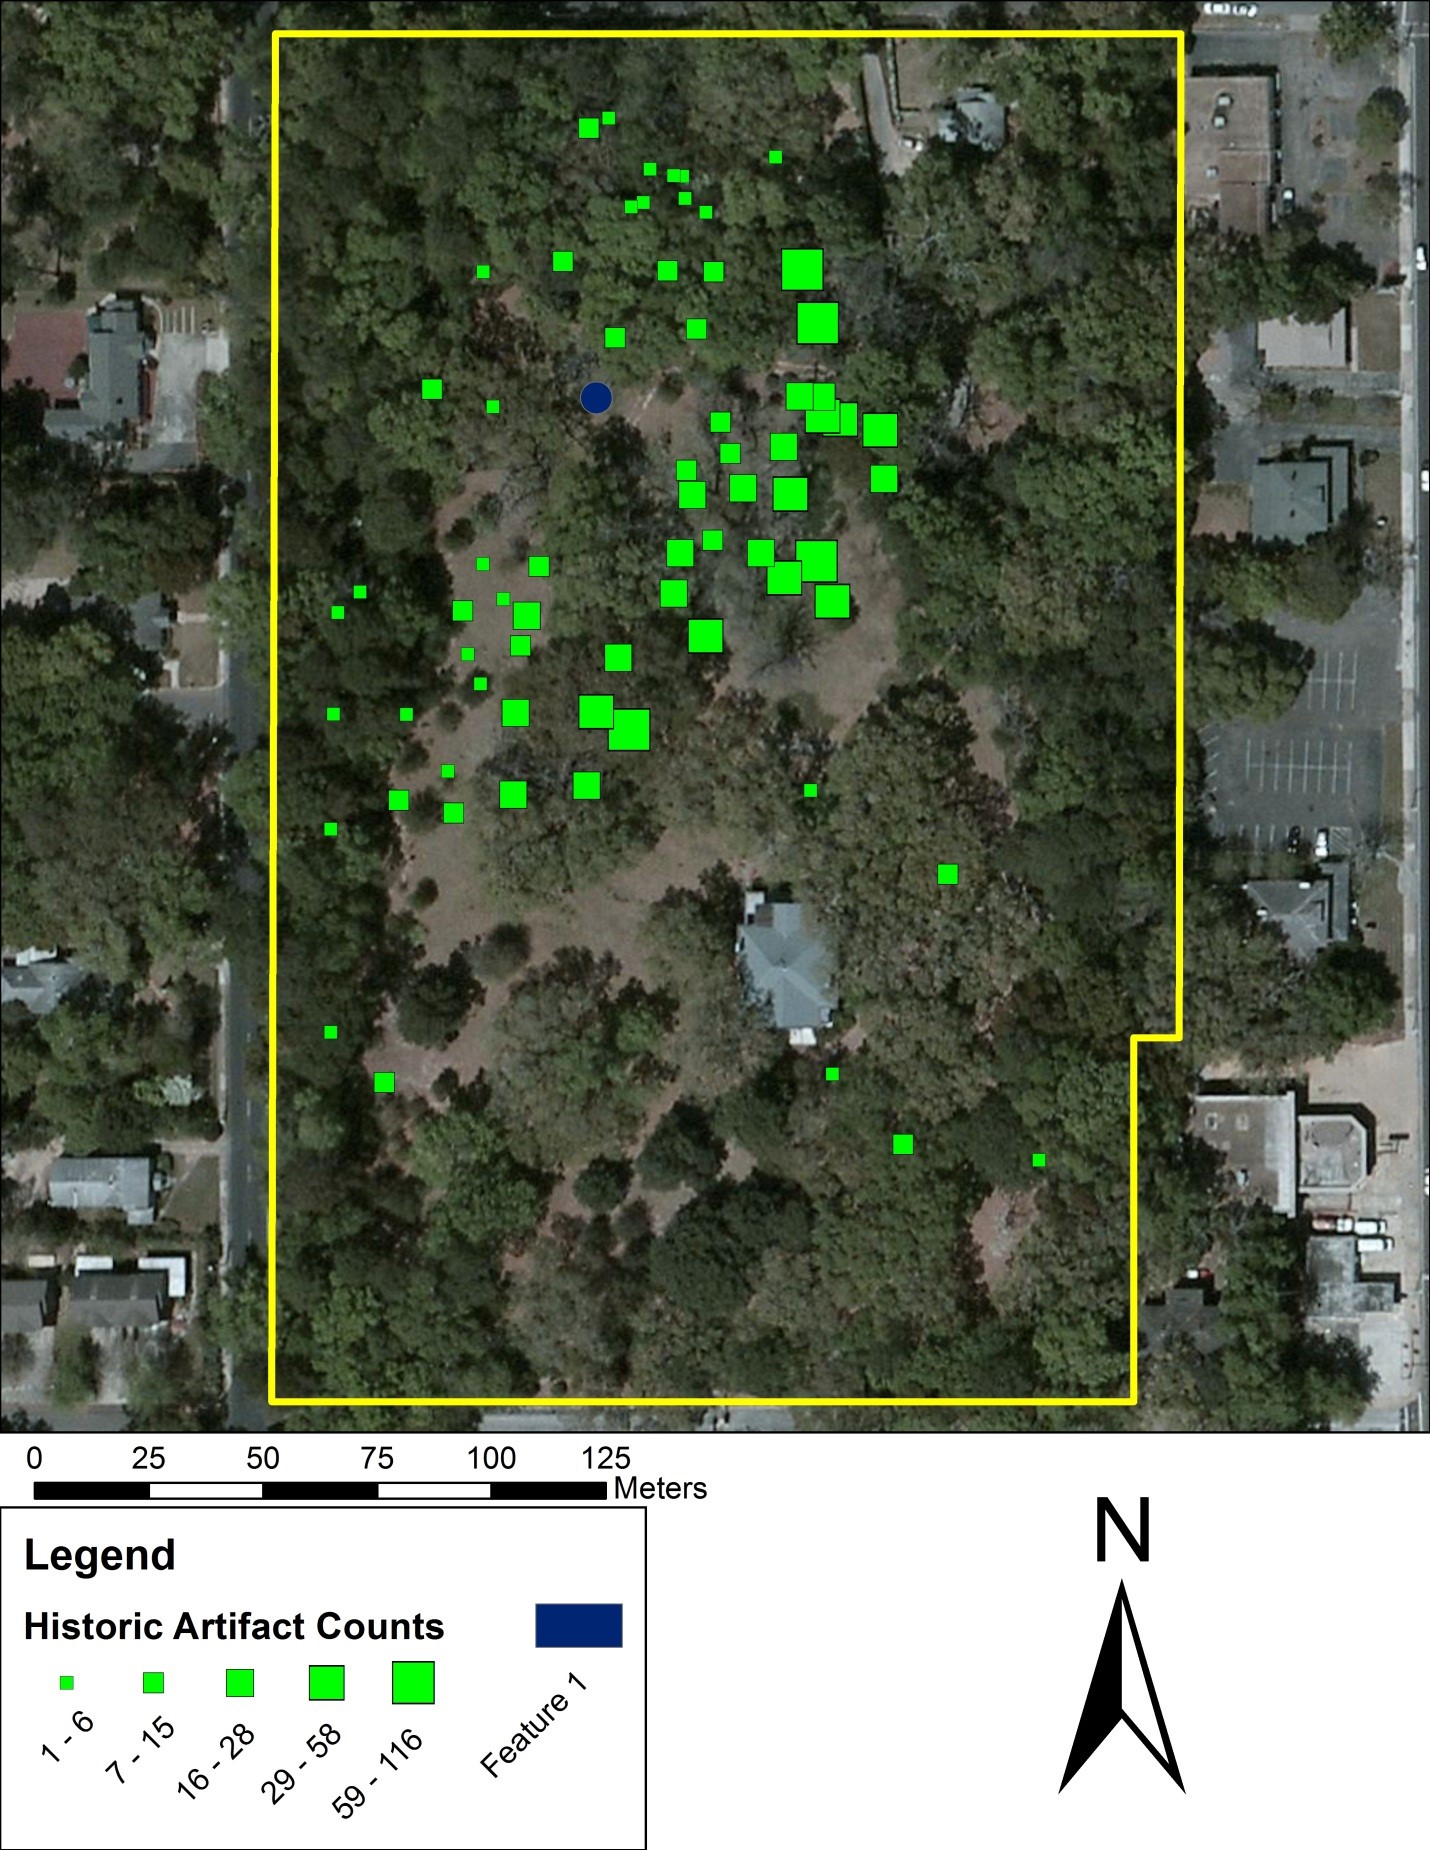 Map showing the distribution of historic artifacts on The Grove property, based on archaeological surveys (TGAR).